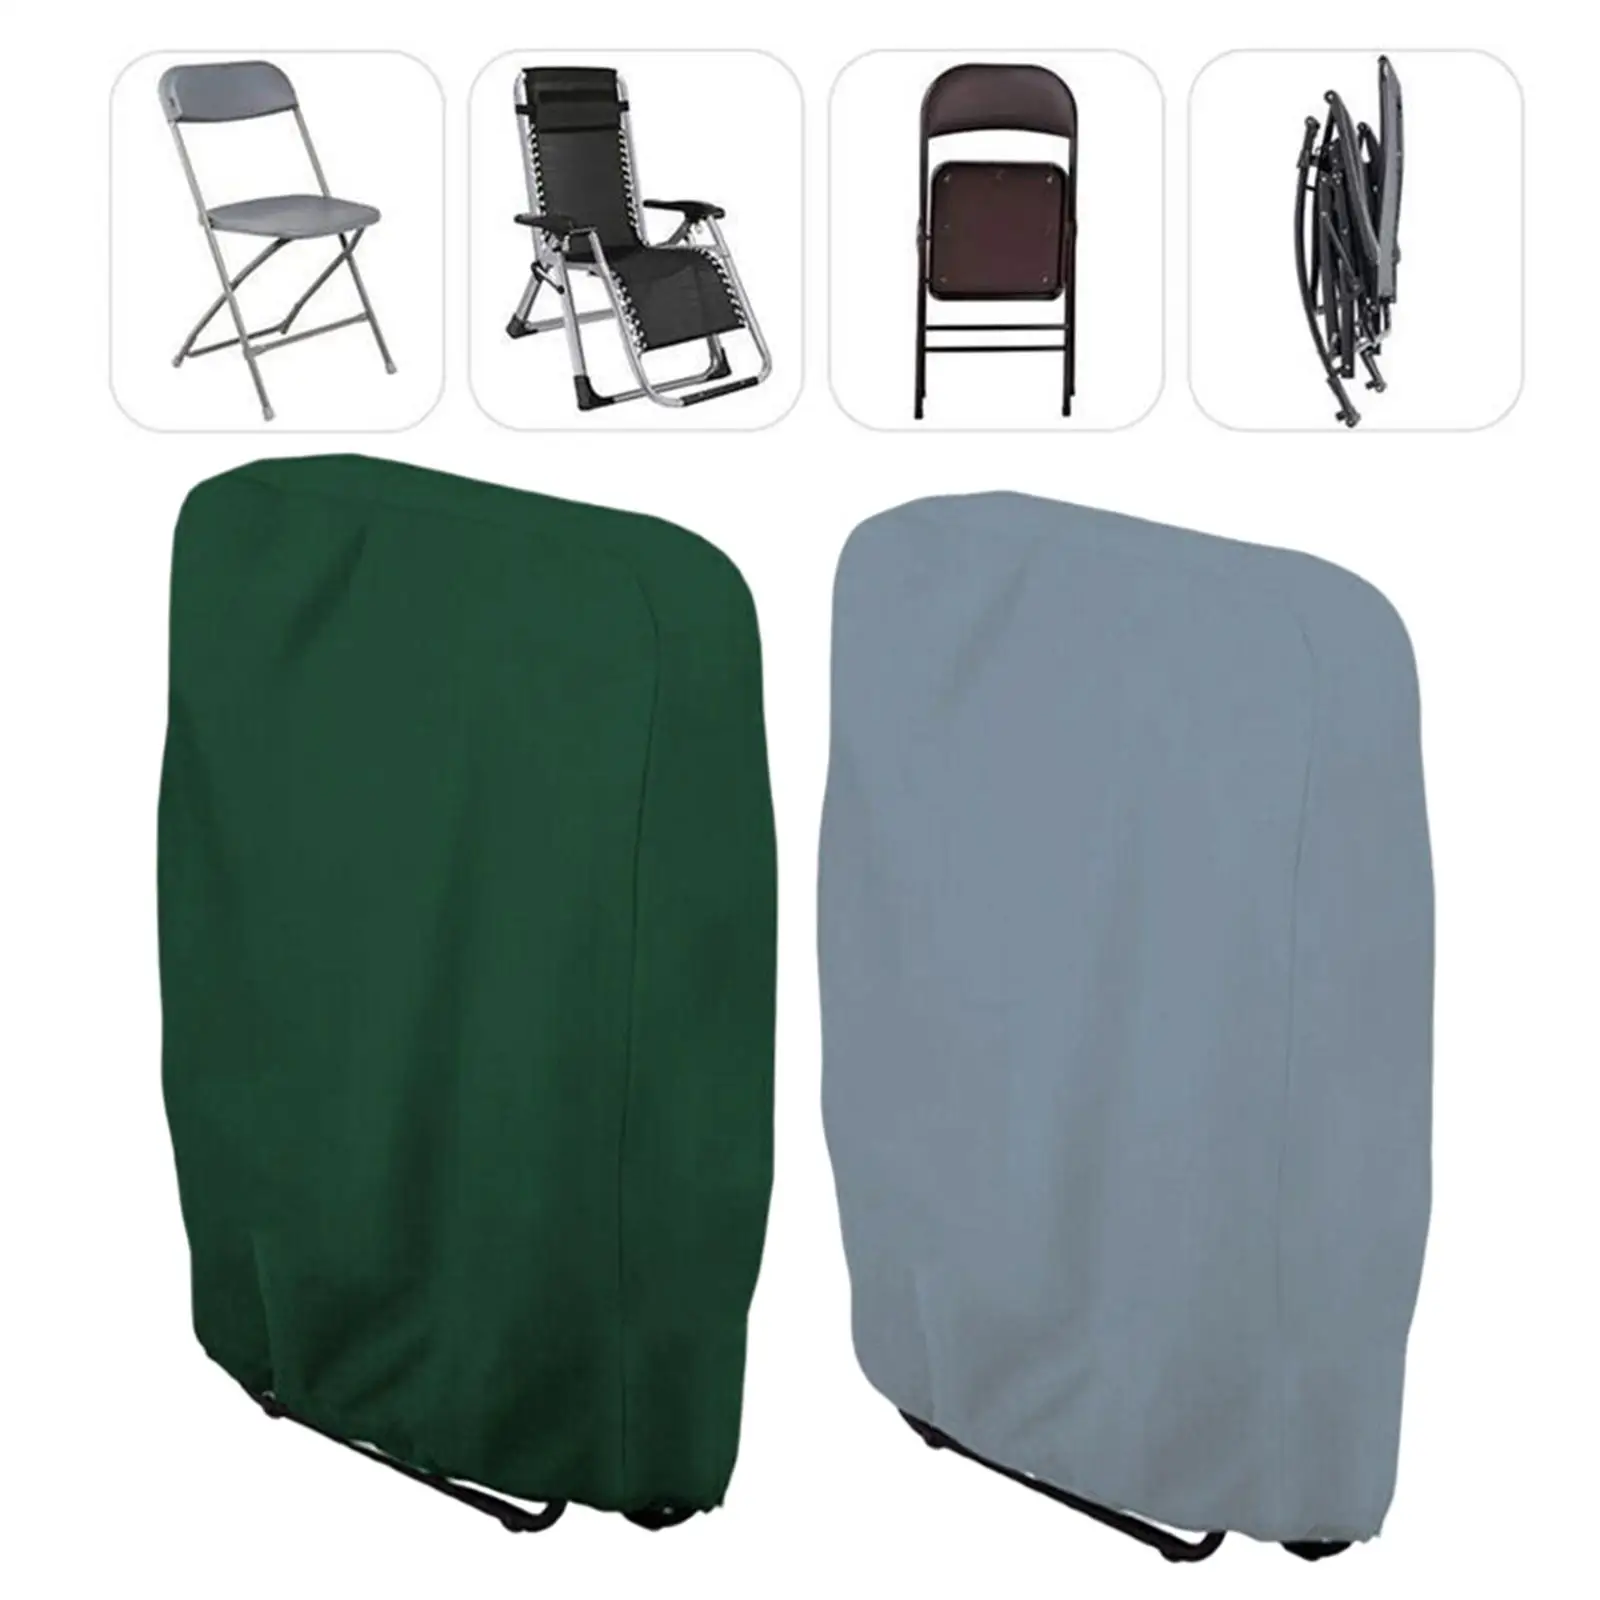 Waterproof Folding Chair Cover with Storage Bag Chair Cover Stretch Lace Seat cover Chair Covers for Veranda Patio Canopy